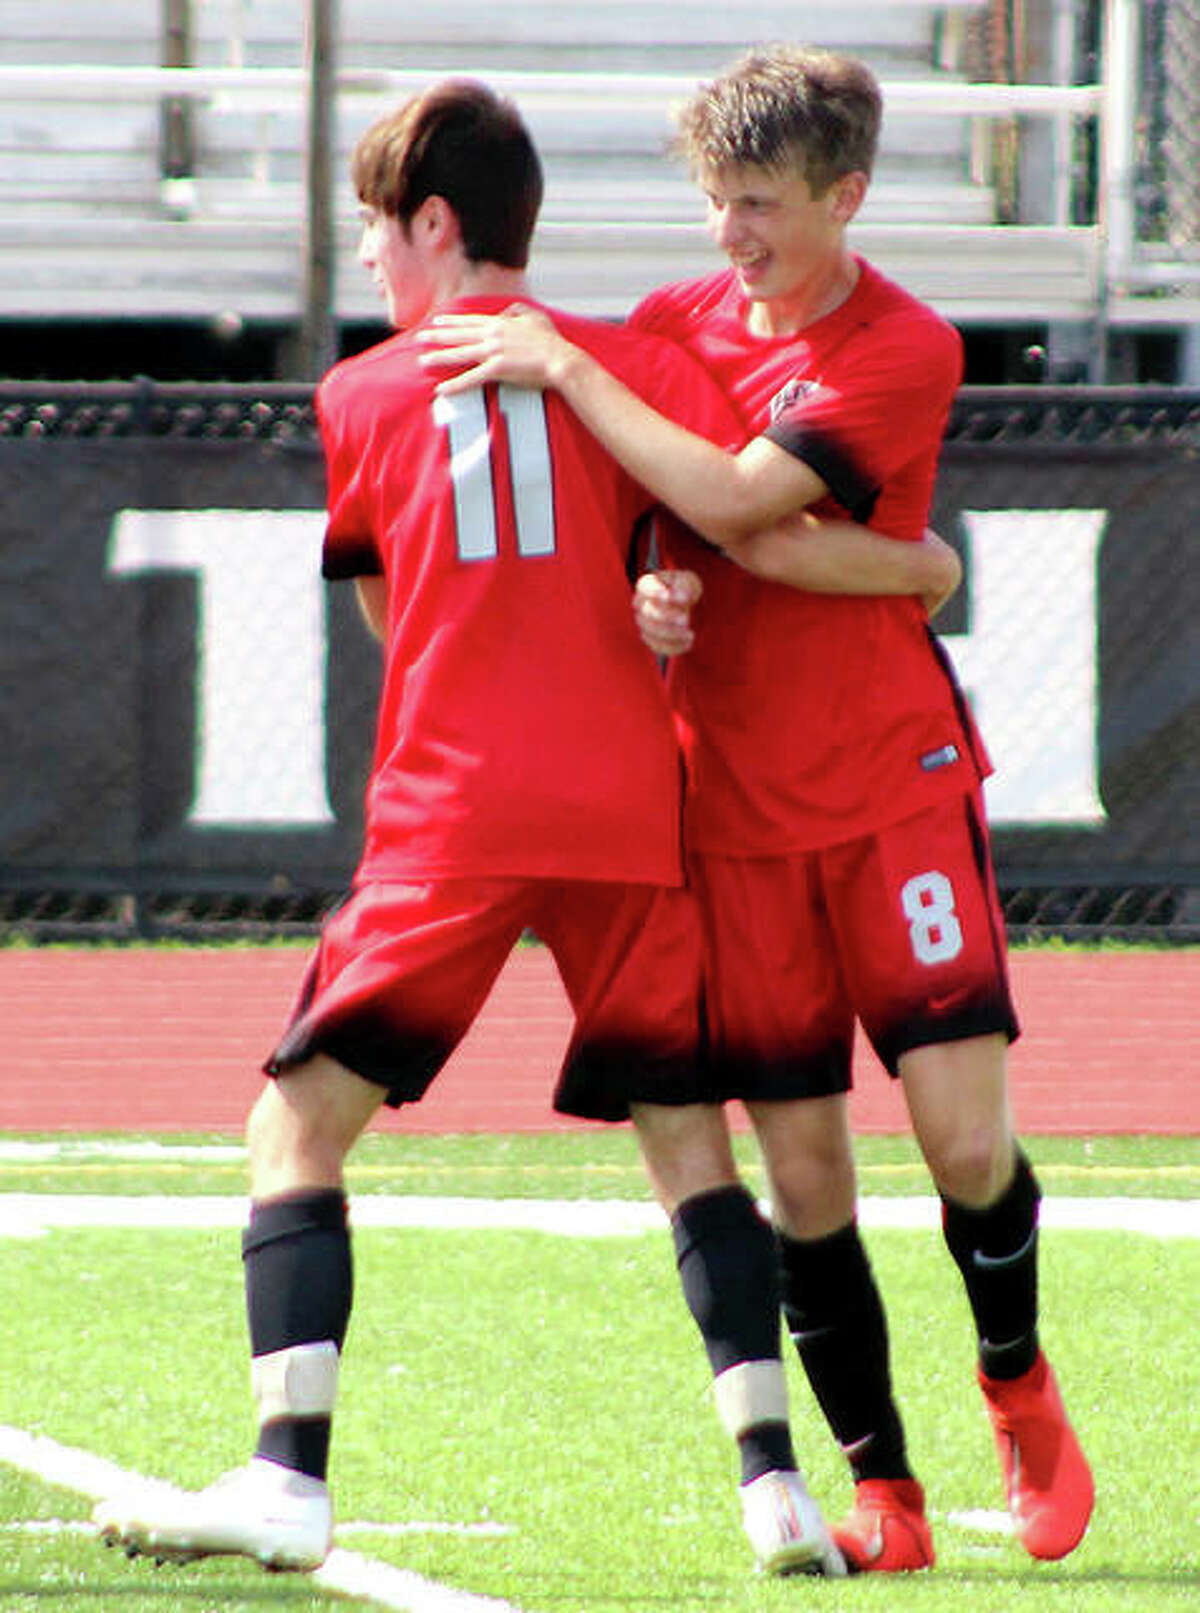 Alton’s Brayden Decker (8) had a goal and two assists Tuesday in his team’s 4-2 win over Belleville East. he is shown being congratulated by teammate Hayden Batchelor after a goal Saturday against Rochester in the Kahok/Redbird Tournament.